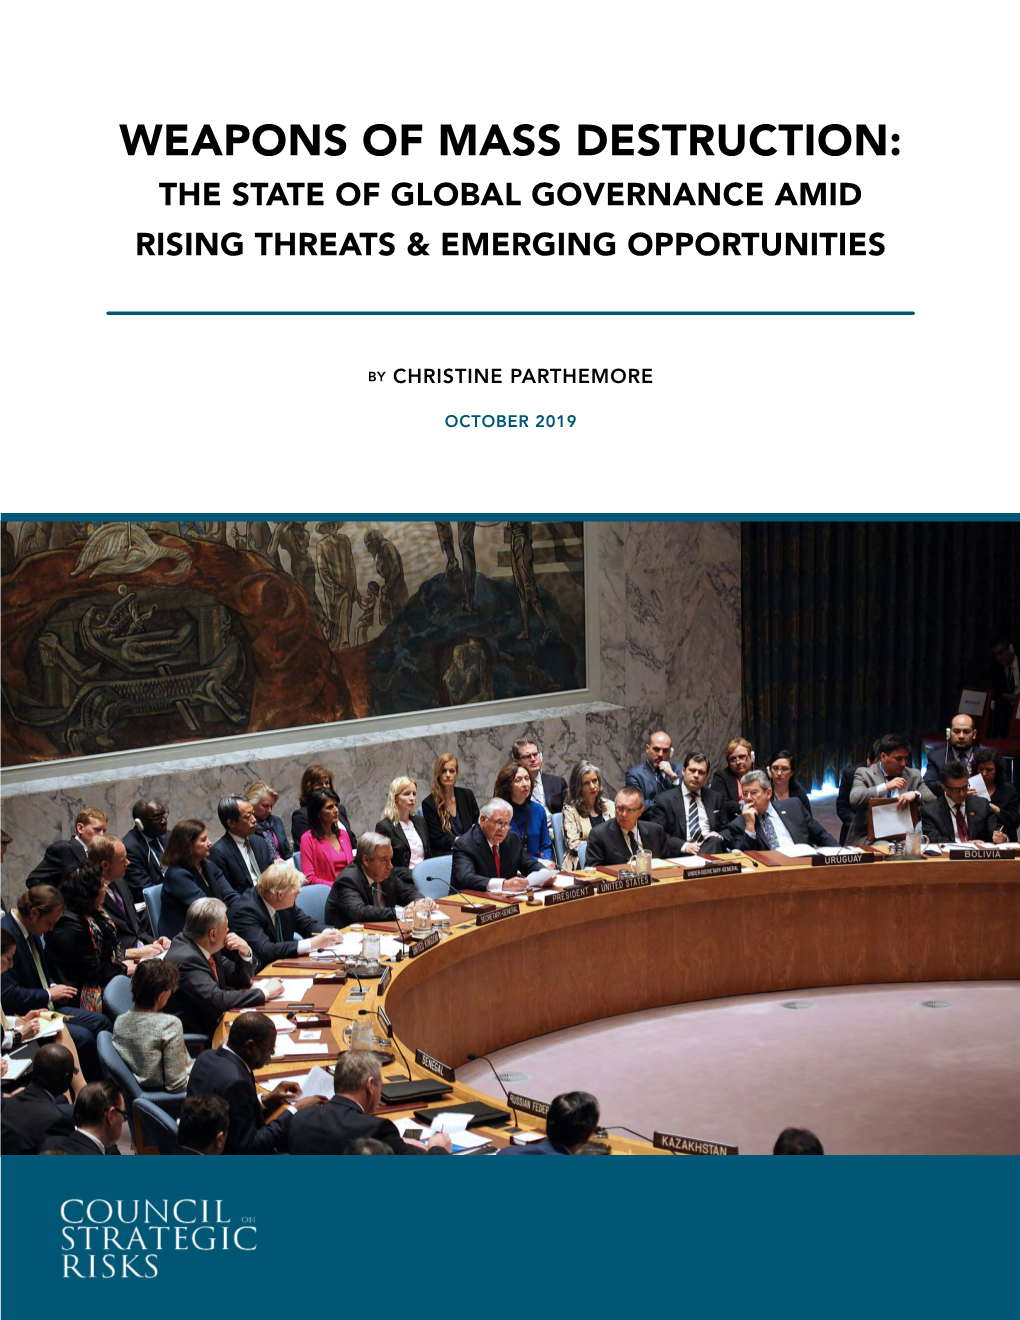 Weapons of Mass Destruction: the State of Global Governance Amid Rising Threats & Emerging Opportunities